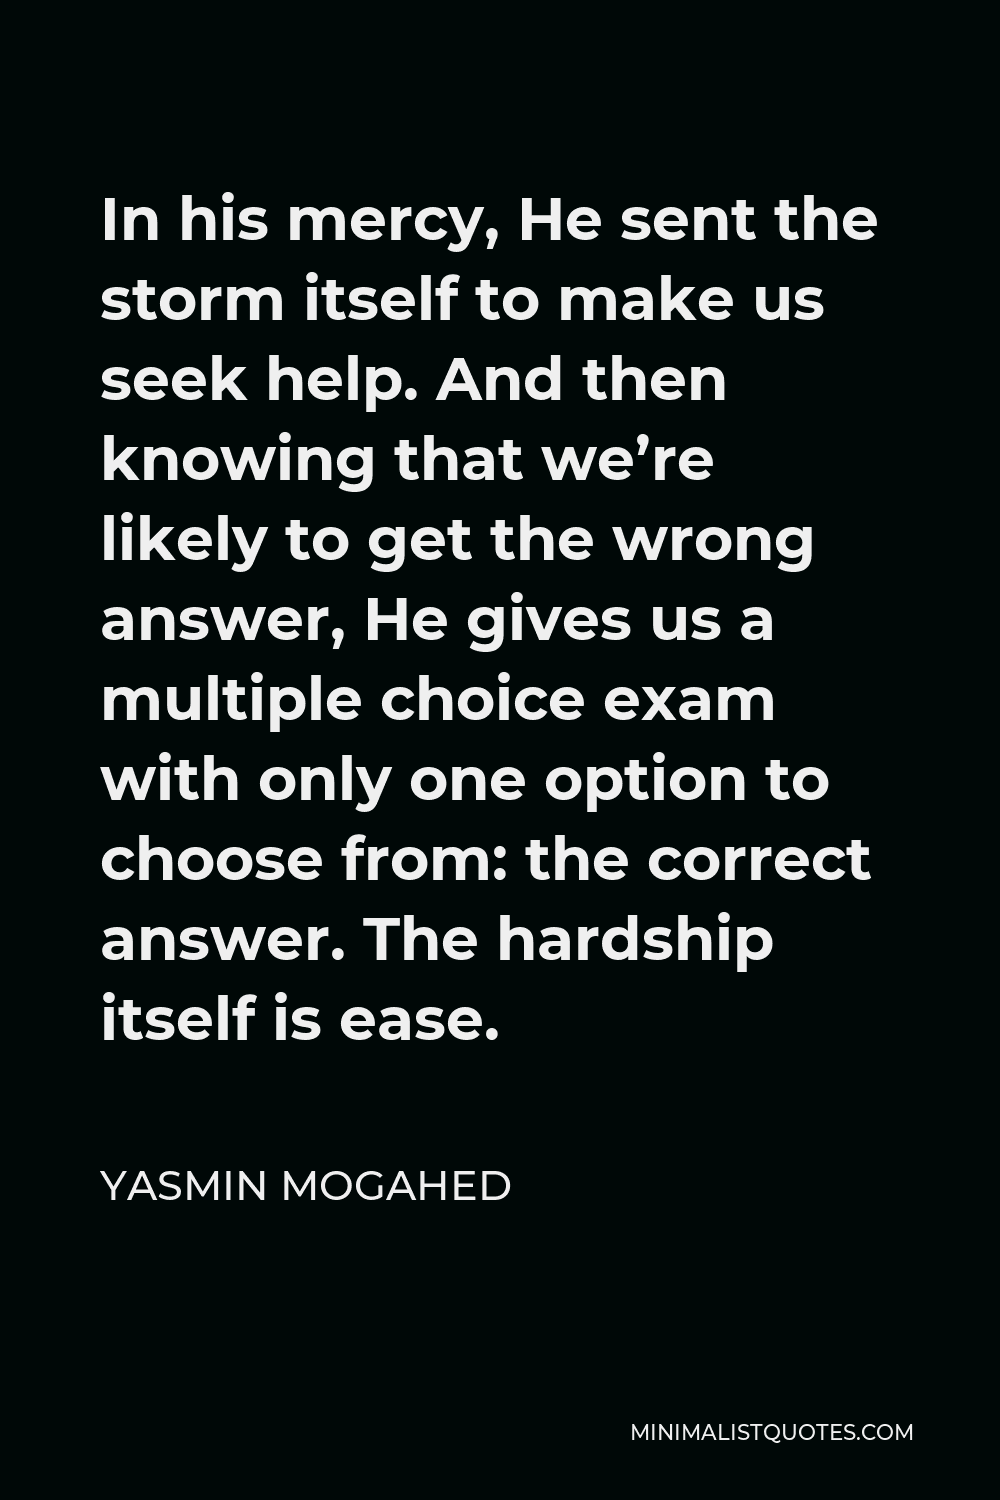 Yasmin Mogahed Quote - In his mercy, He sent the storm itself to make us seek help. And then knowing that we’re likely to get the wrong answer, He gives us a multiple choice exam with only one option to choose from: the correct answer. The hardship itself is ease.